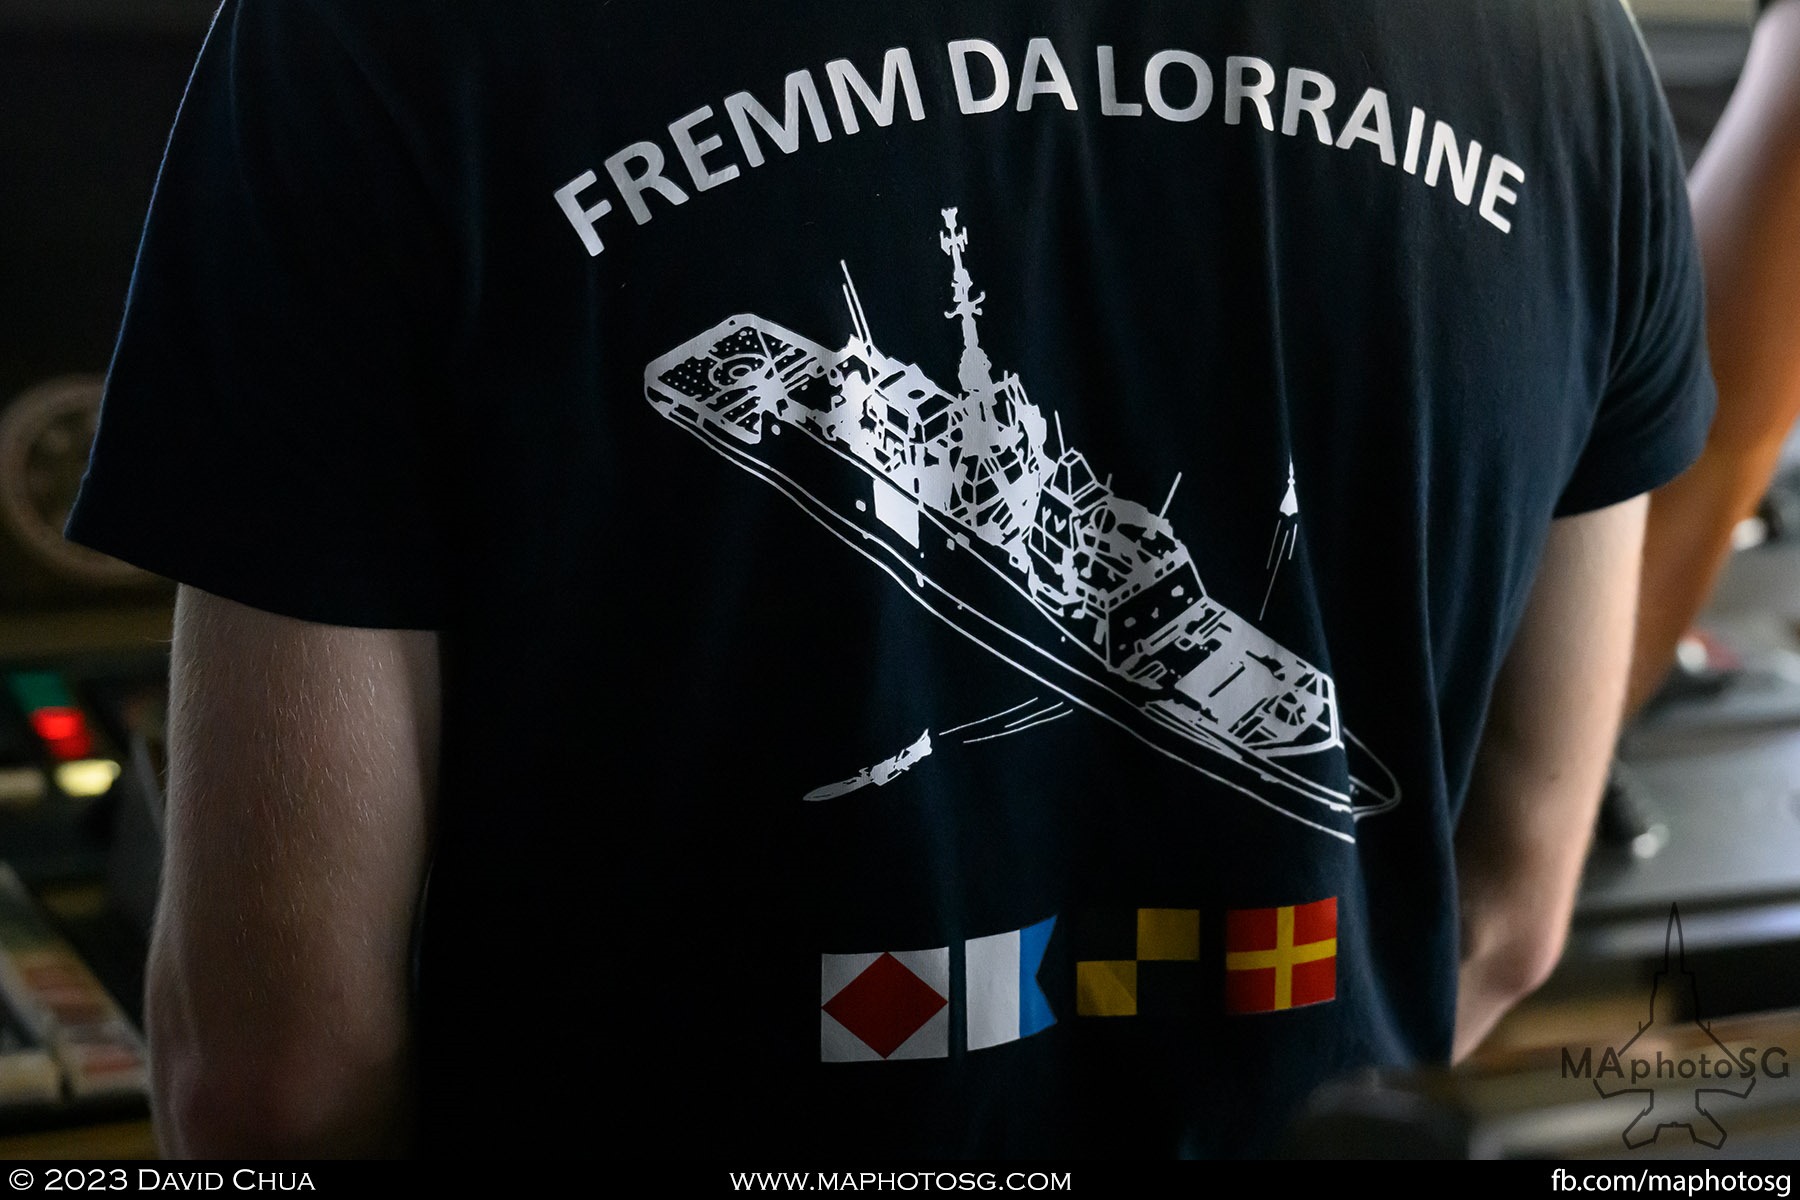 A crew member with a Tshirt of the ship